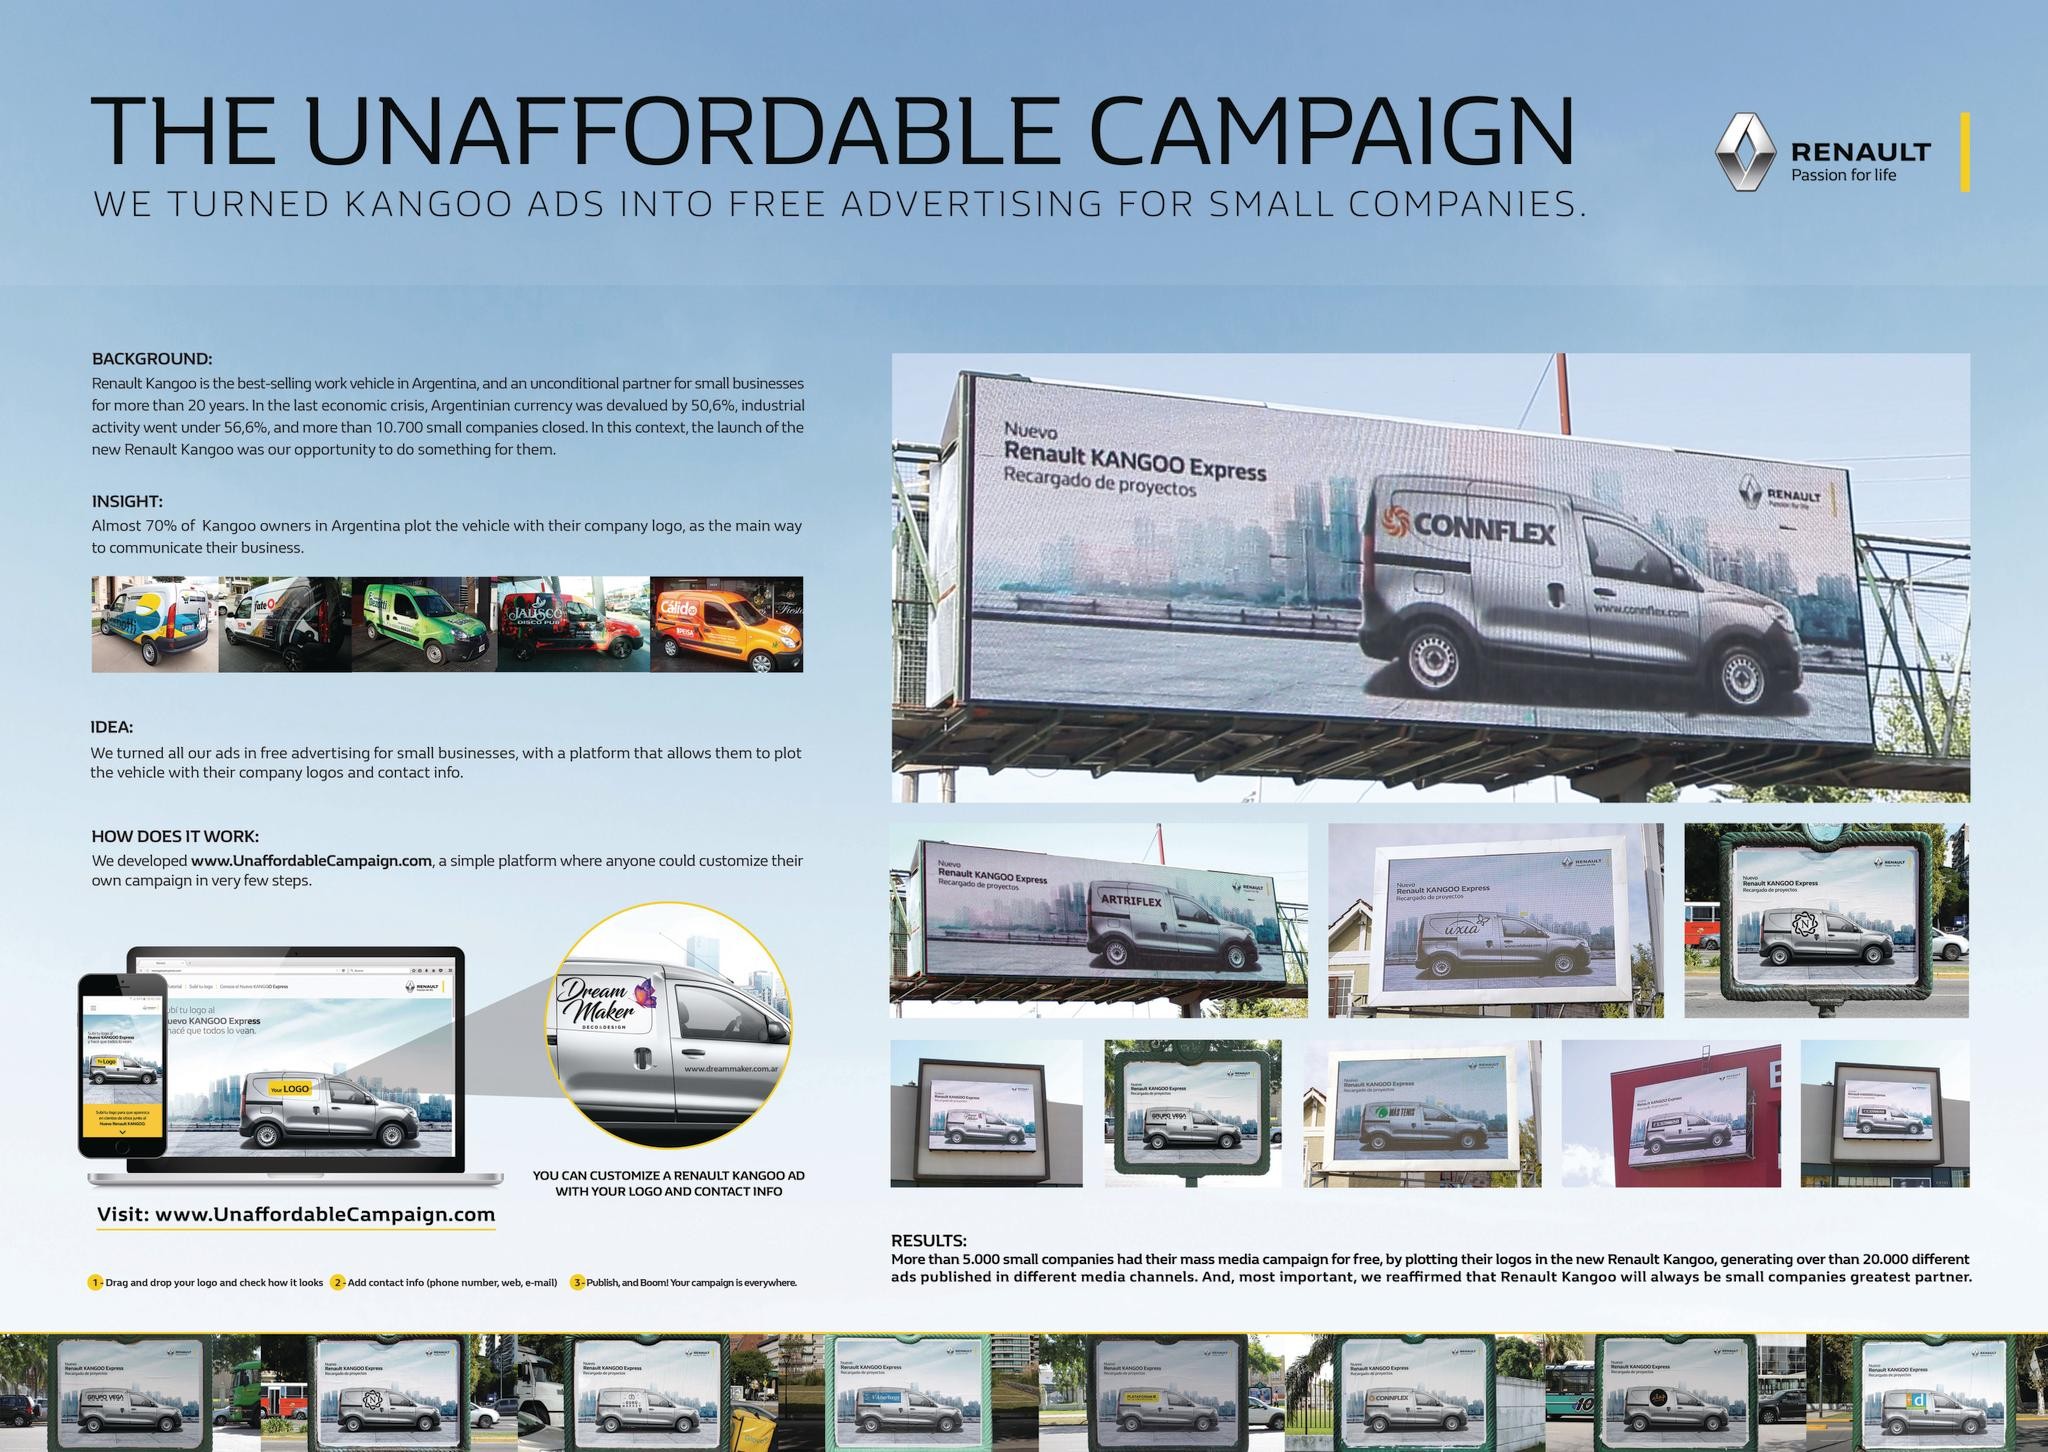 THE UNAFFORDABLE CAMPAIGN